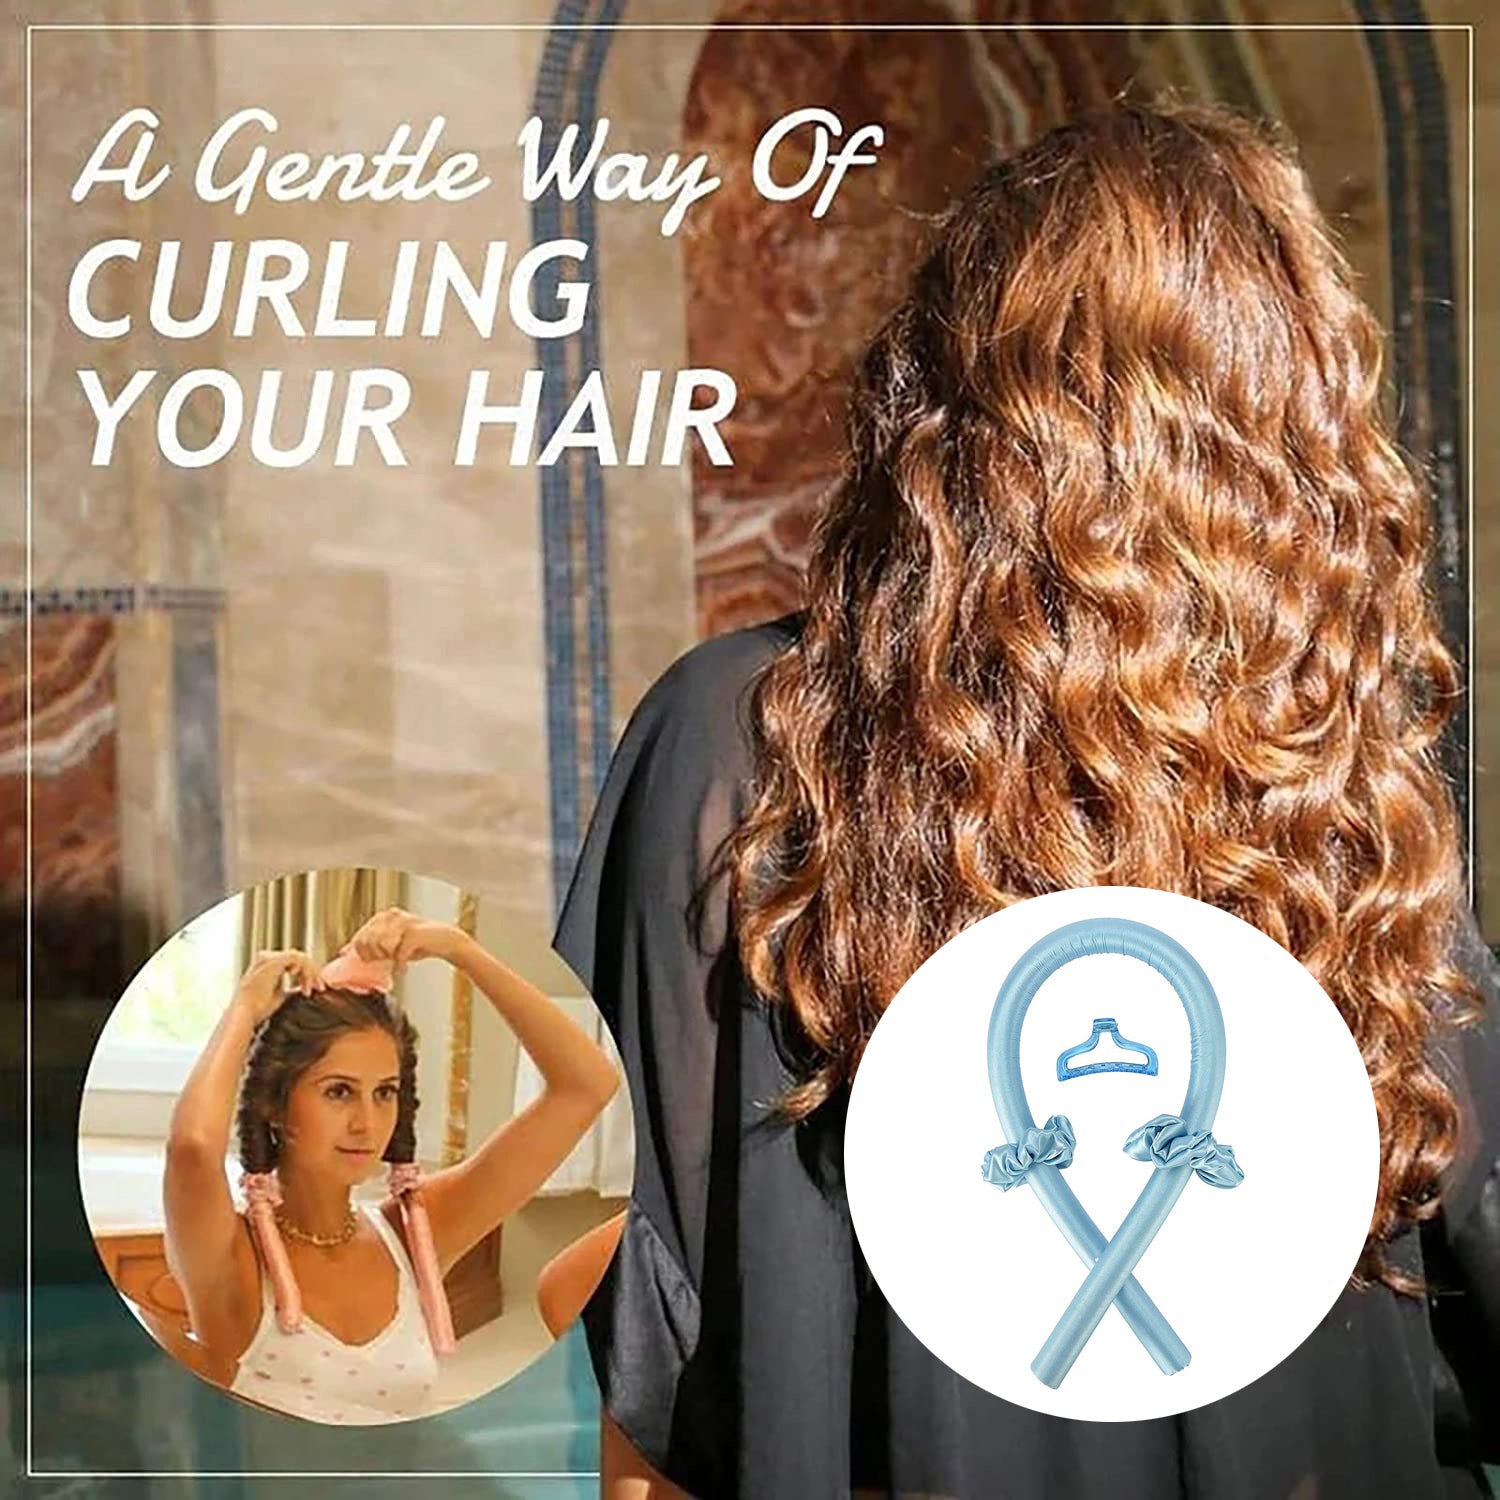 CurlMagic™ Create bouncy curls without using heat.